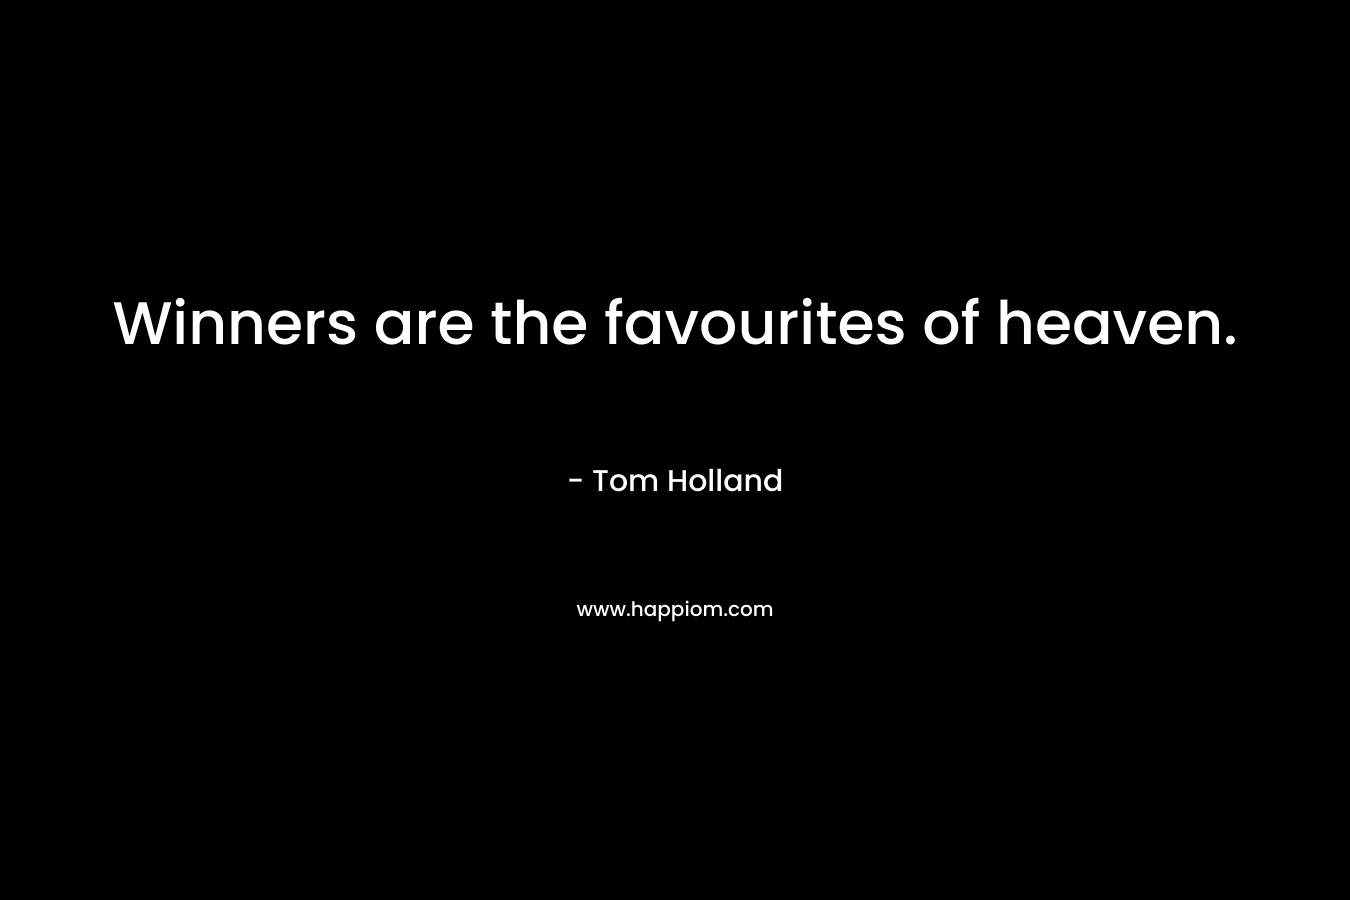 Winners are the favourites of heaven.